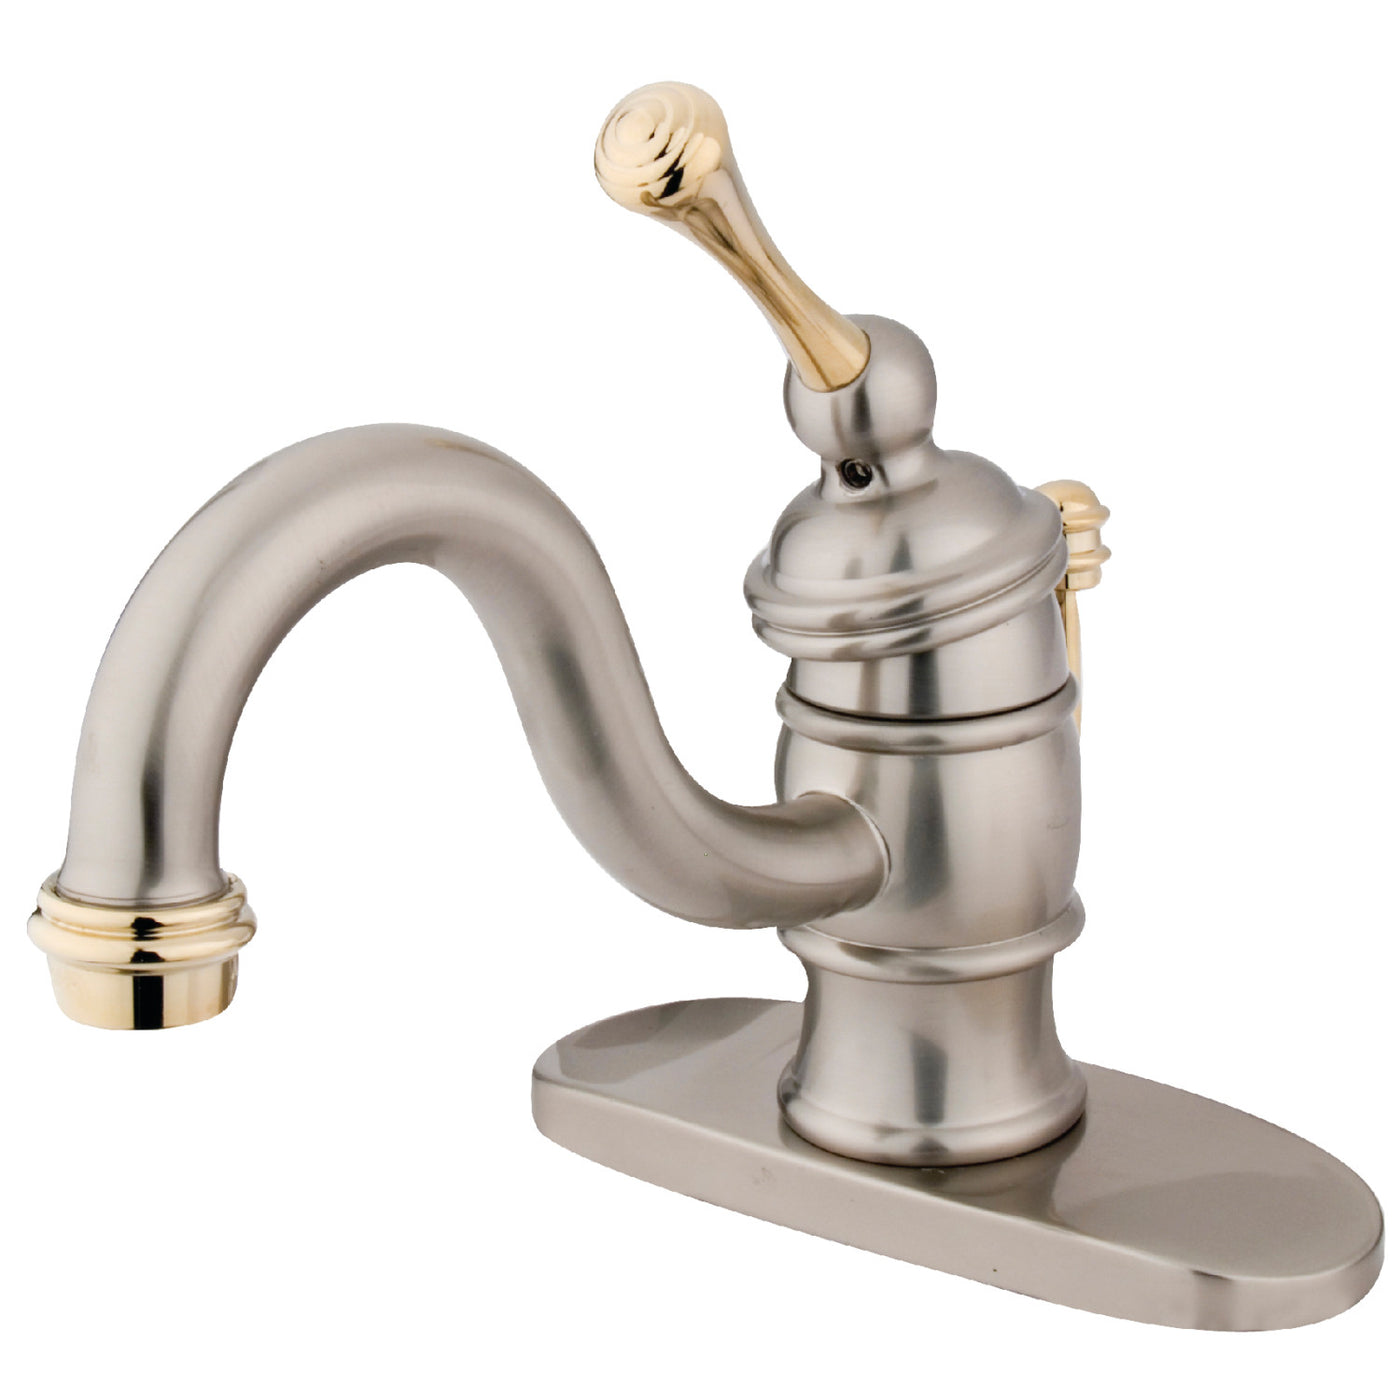 Elements of Design EB3409BL Single-Handle Bathroom Faucet with Pop-Up Drain, Brushed Nickel/Polished Brass